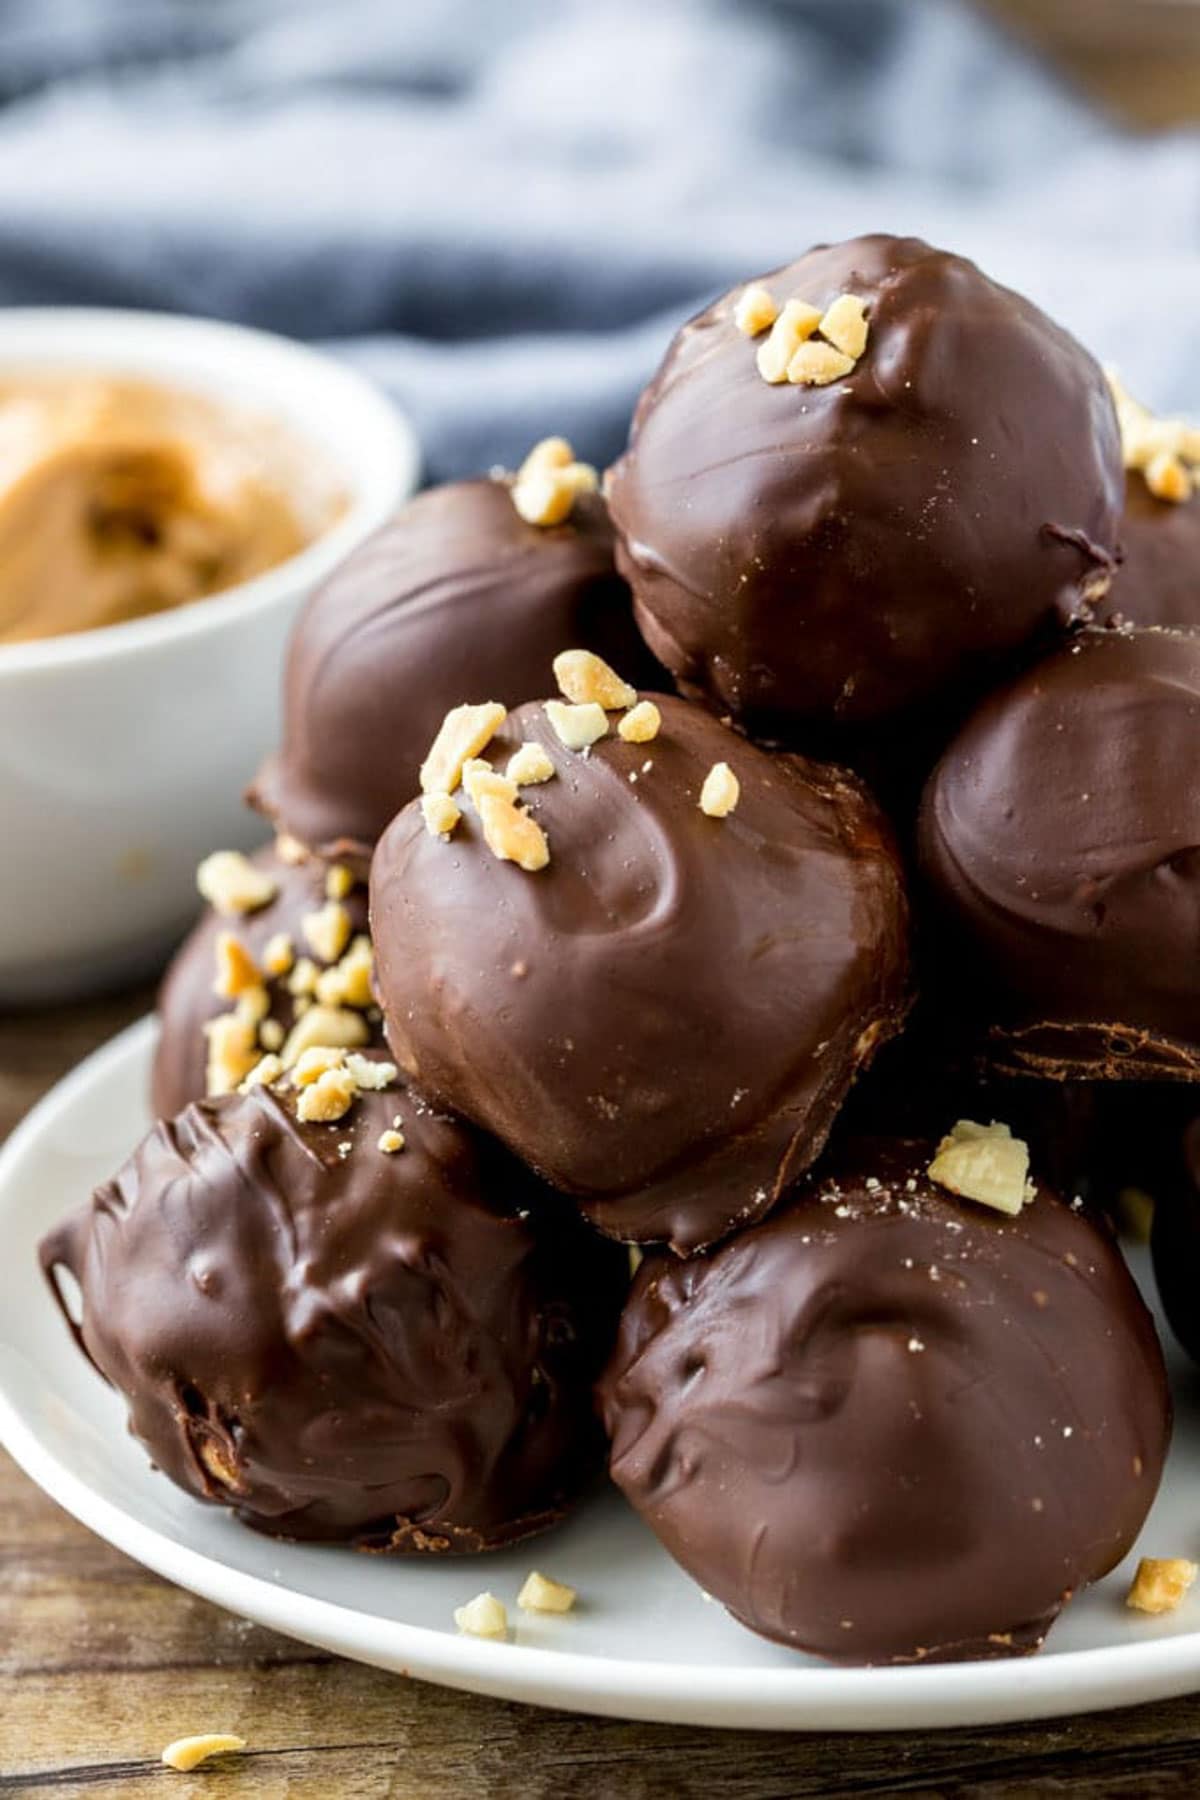 Chocolate covered peanut butter balls in a stakc on a plate.